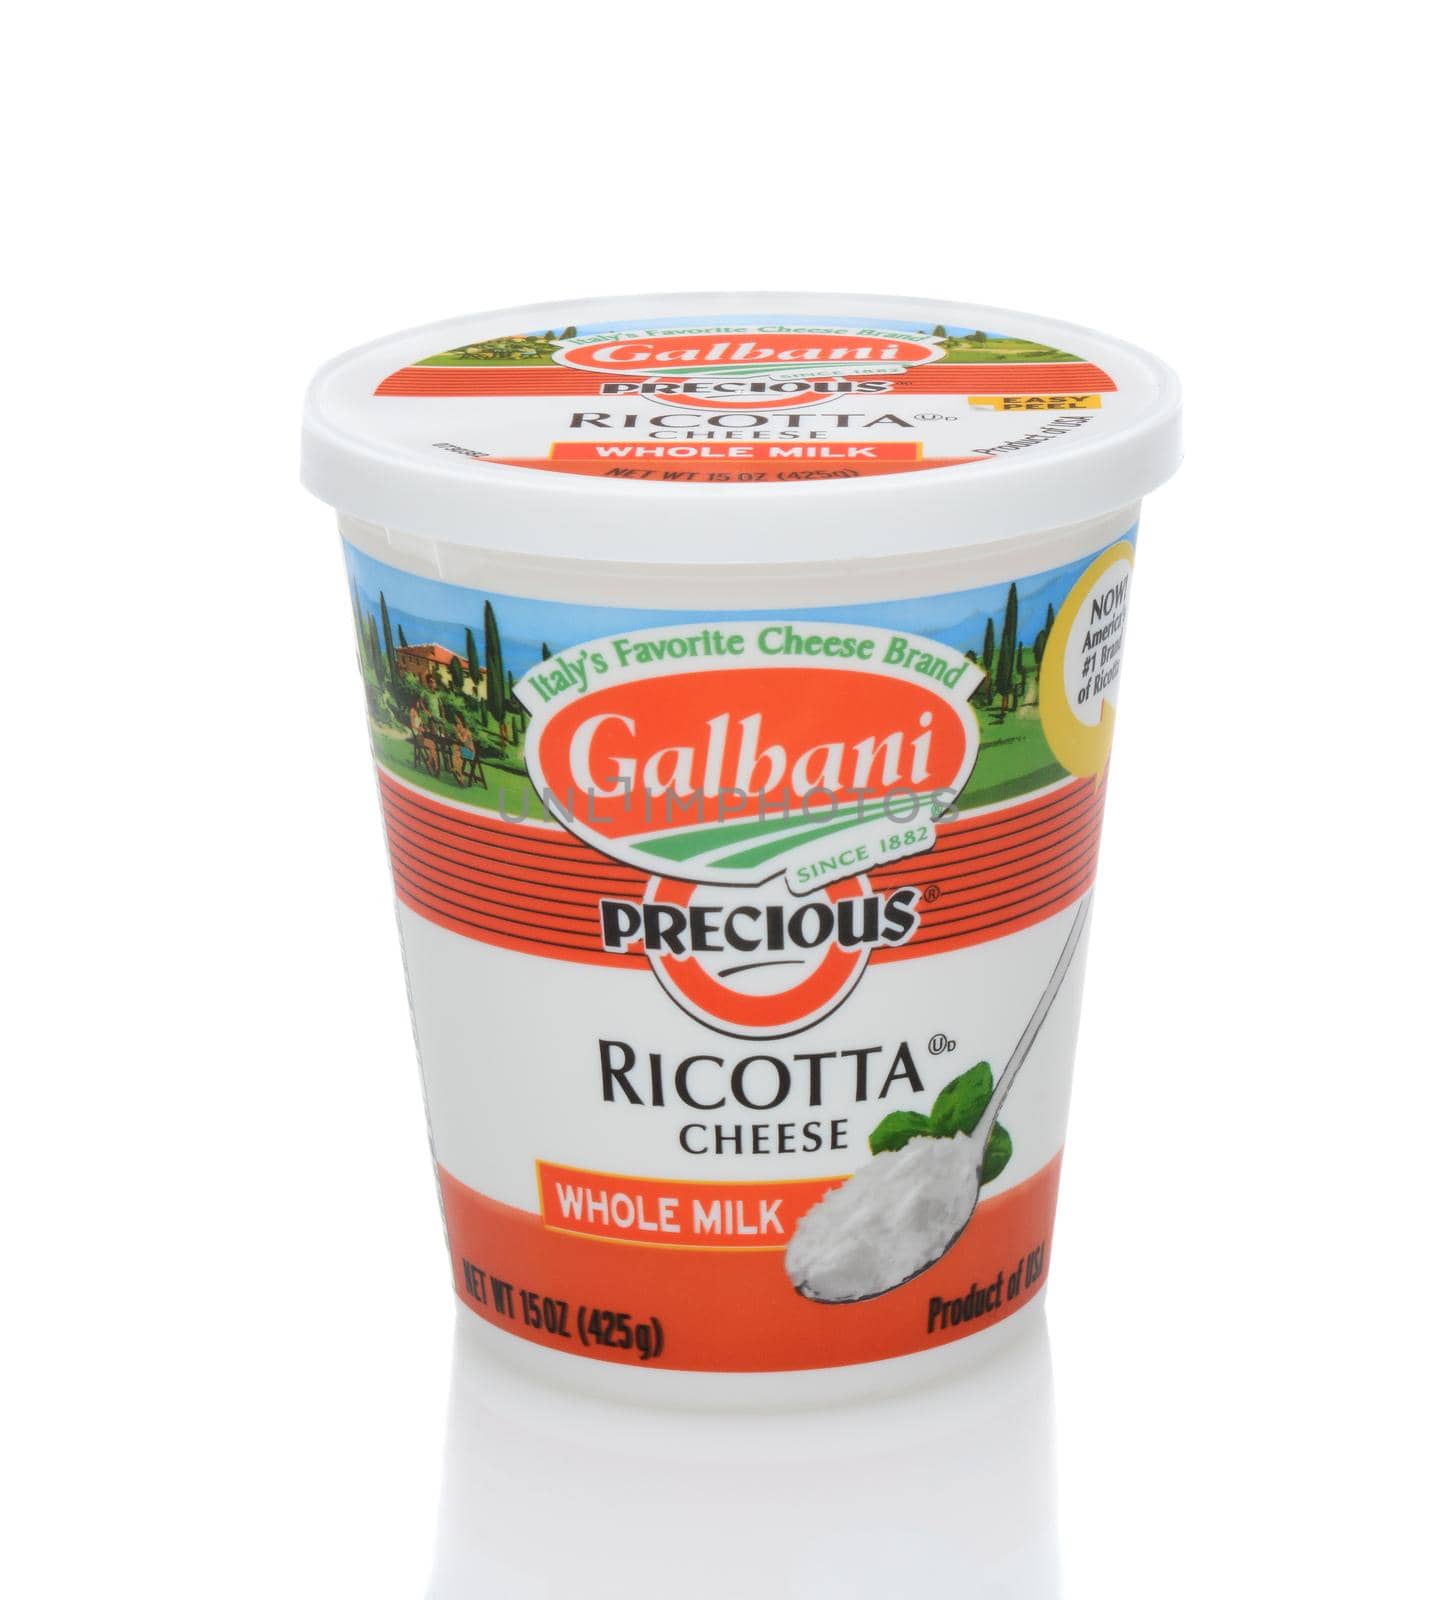 IRVINE, CA - DECEMBER 12, 2013: A 15 ounce container of Galbani Precious Ricotta Cheese. Galbani founded in 1882 by Egidio Galbani, is part of the Lactalis American Group, Inc. 